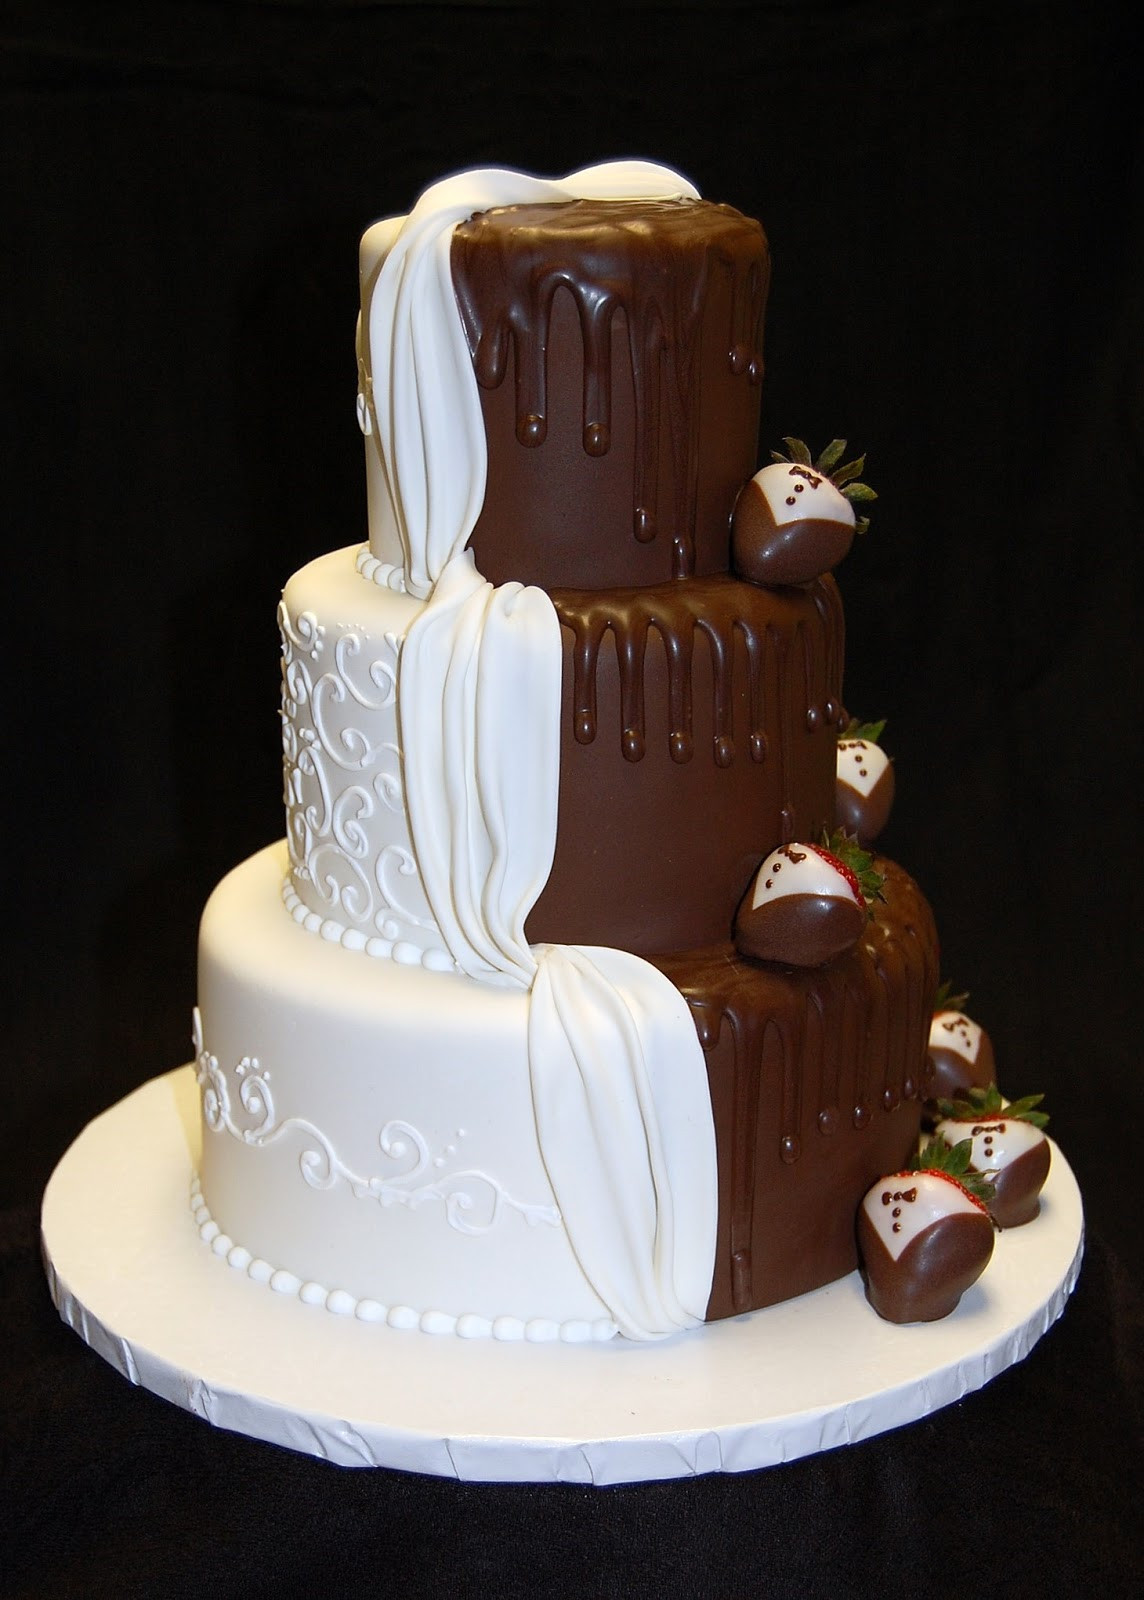 Picture Of Wedding Cakes
 Drea s Dessert Factory "His and Hers" Wedding Cake